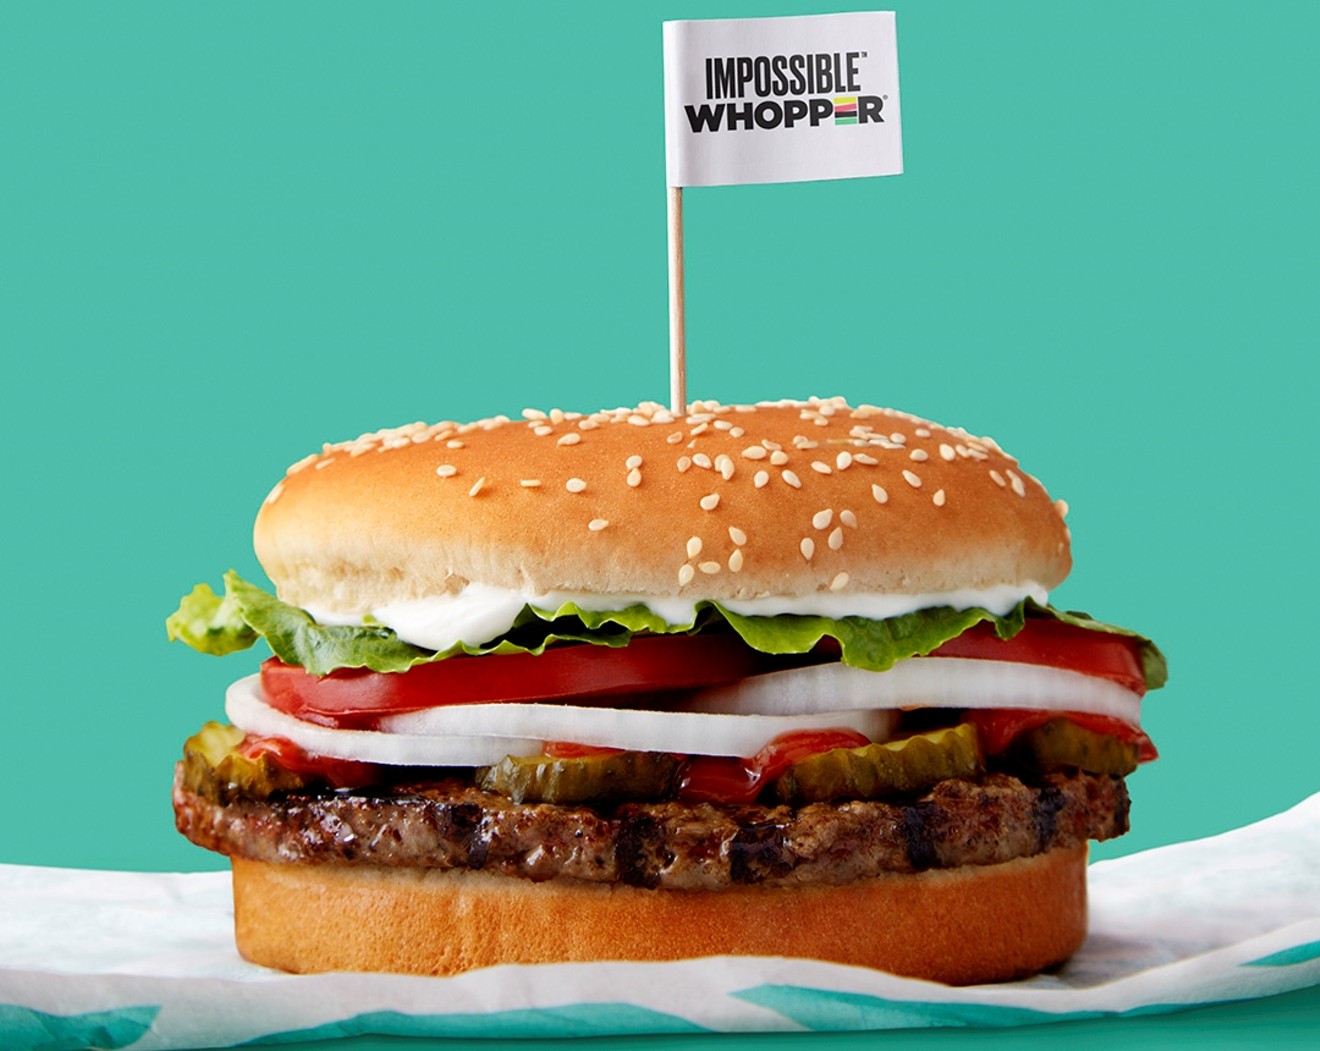 The Impossible Whopper is here!